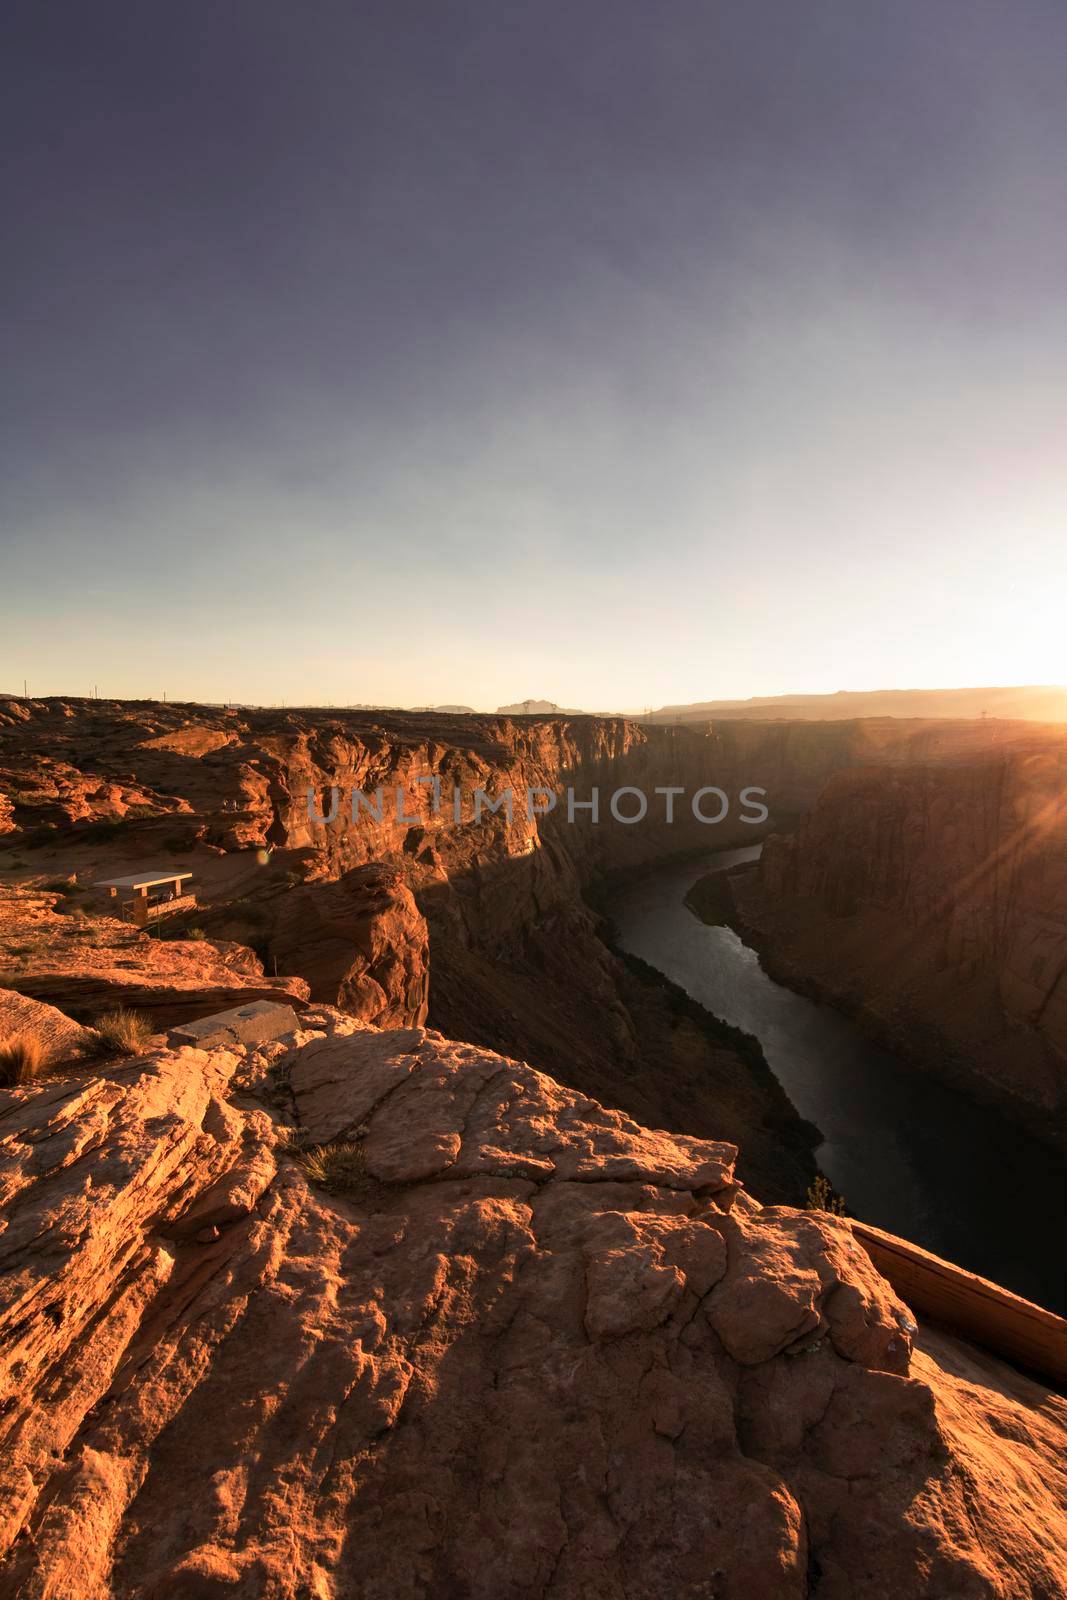 Golden hour view of Colorado river crossing a canyon in Page in Arizona USA